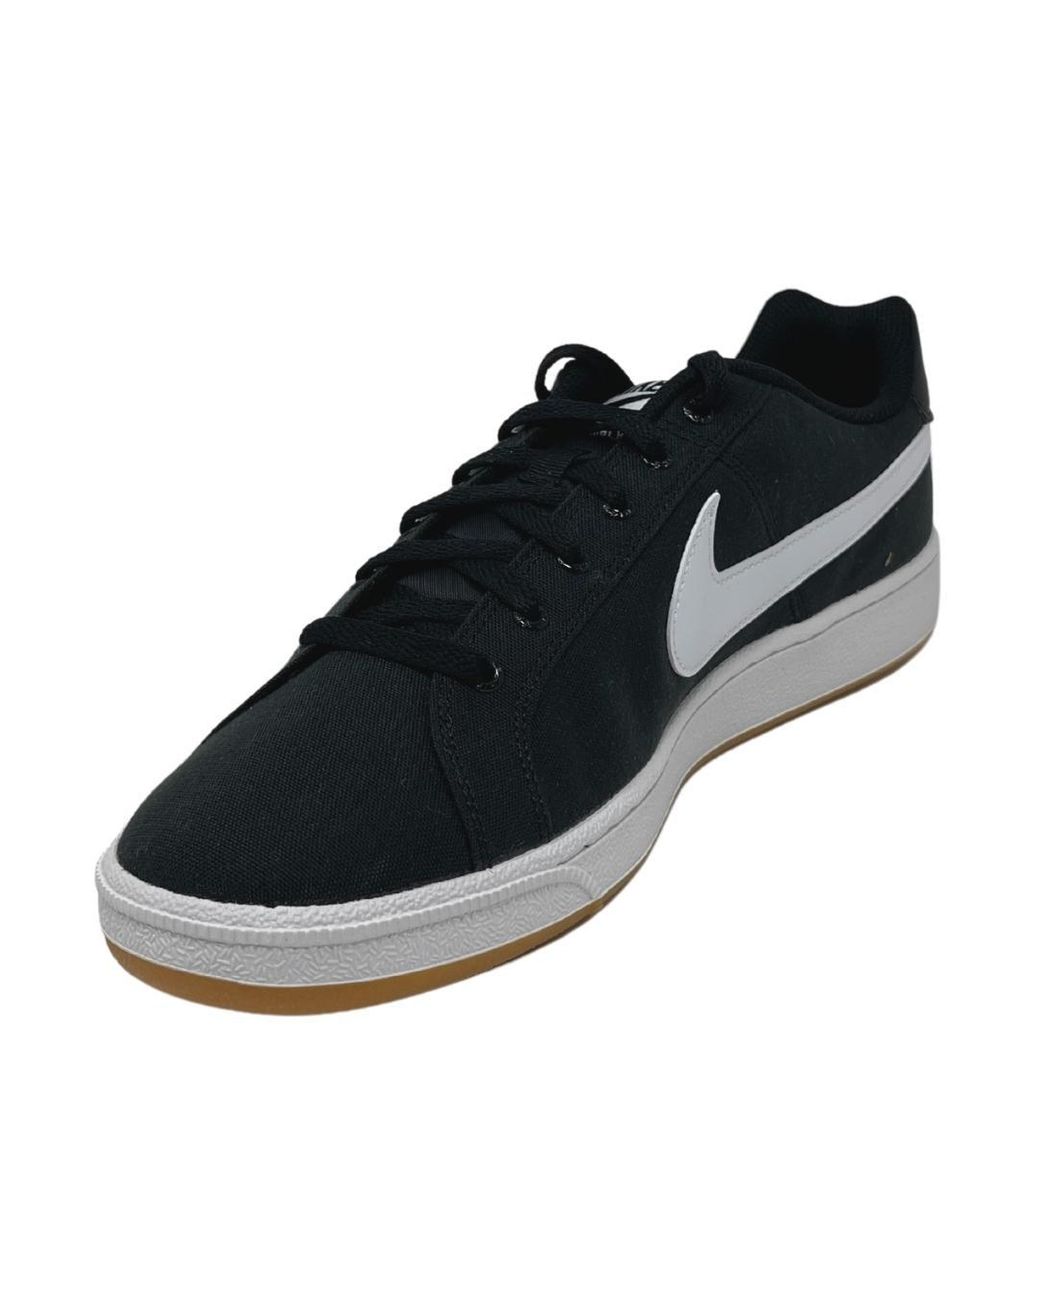 Nike Court Royale Canvas Aa2156 005 Black Trainers for Men | Lyst